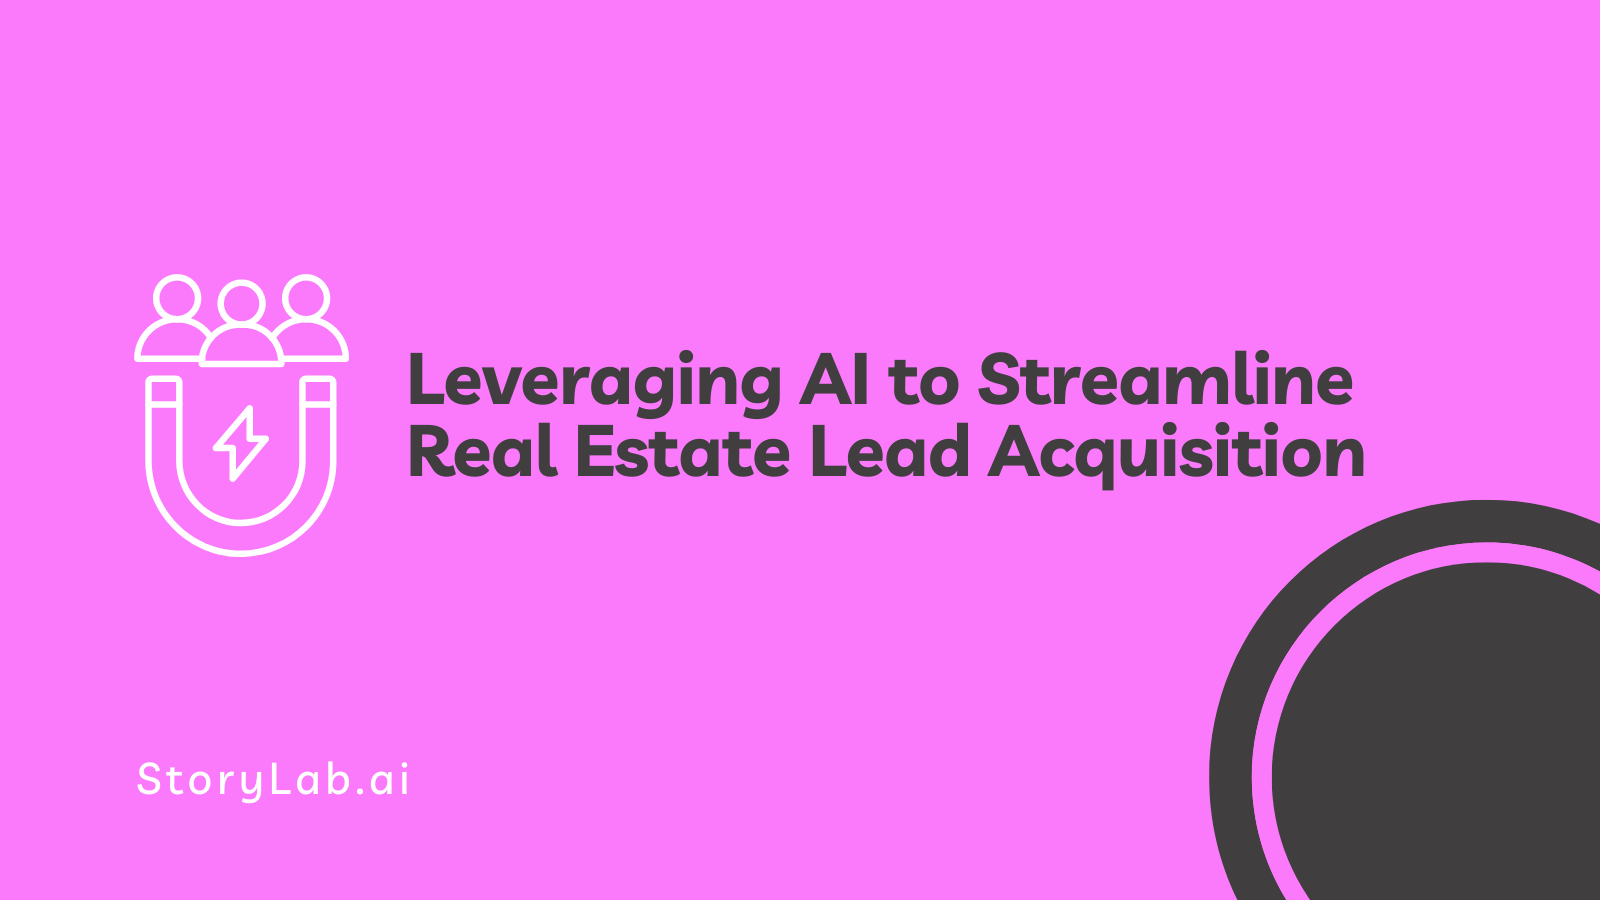 Leveraging AI to Streamline Real Estate Lead Acquisition